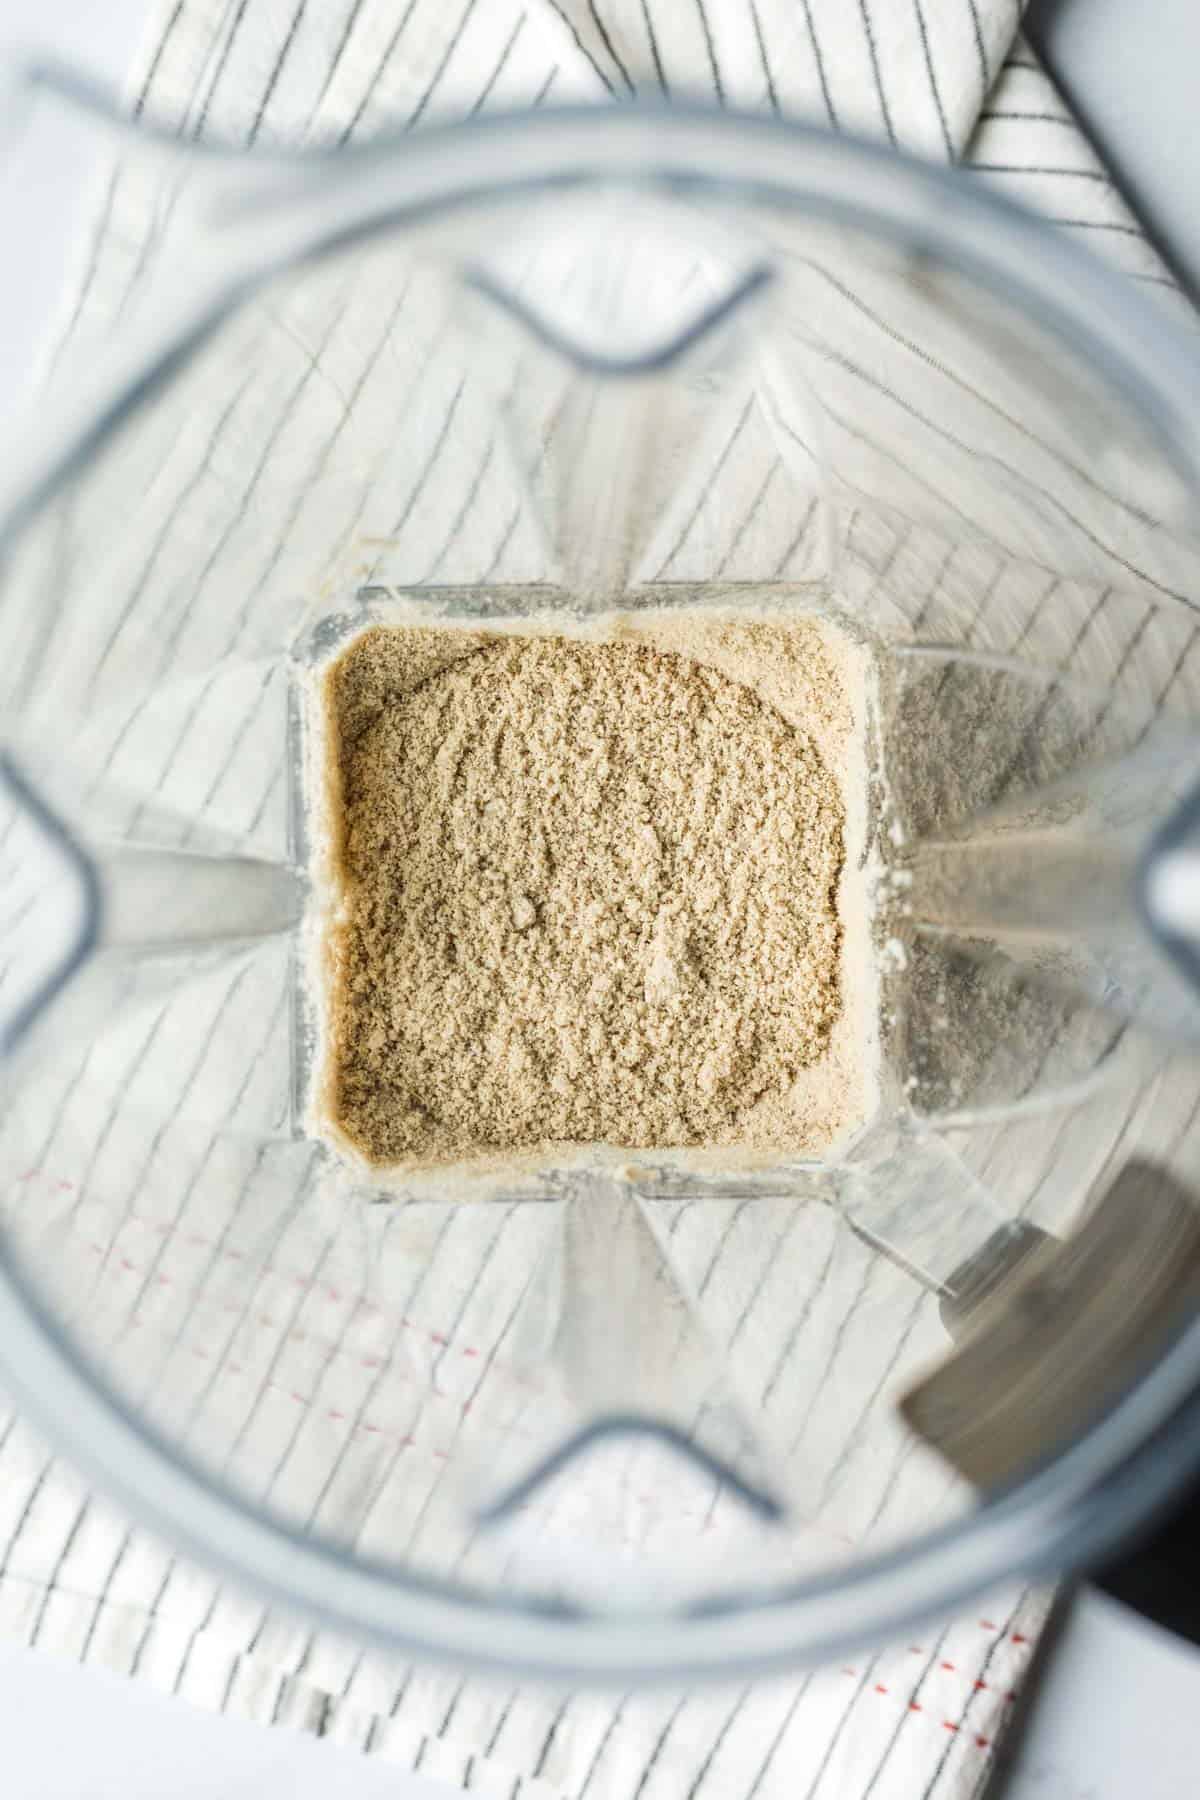 looking down into the blender at the finely textured sunflower flour.